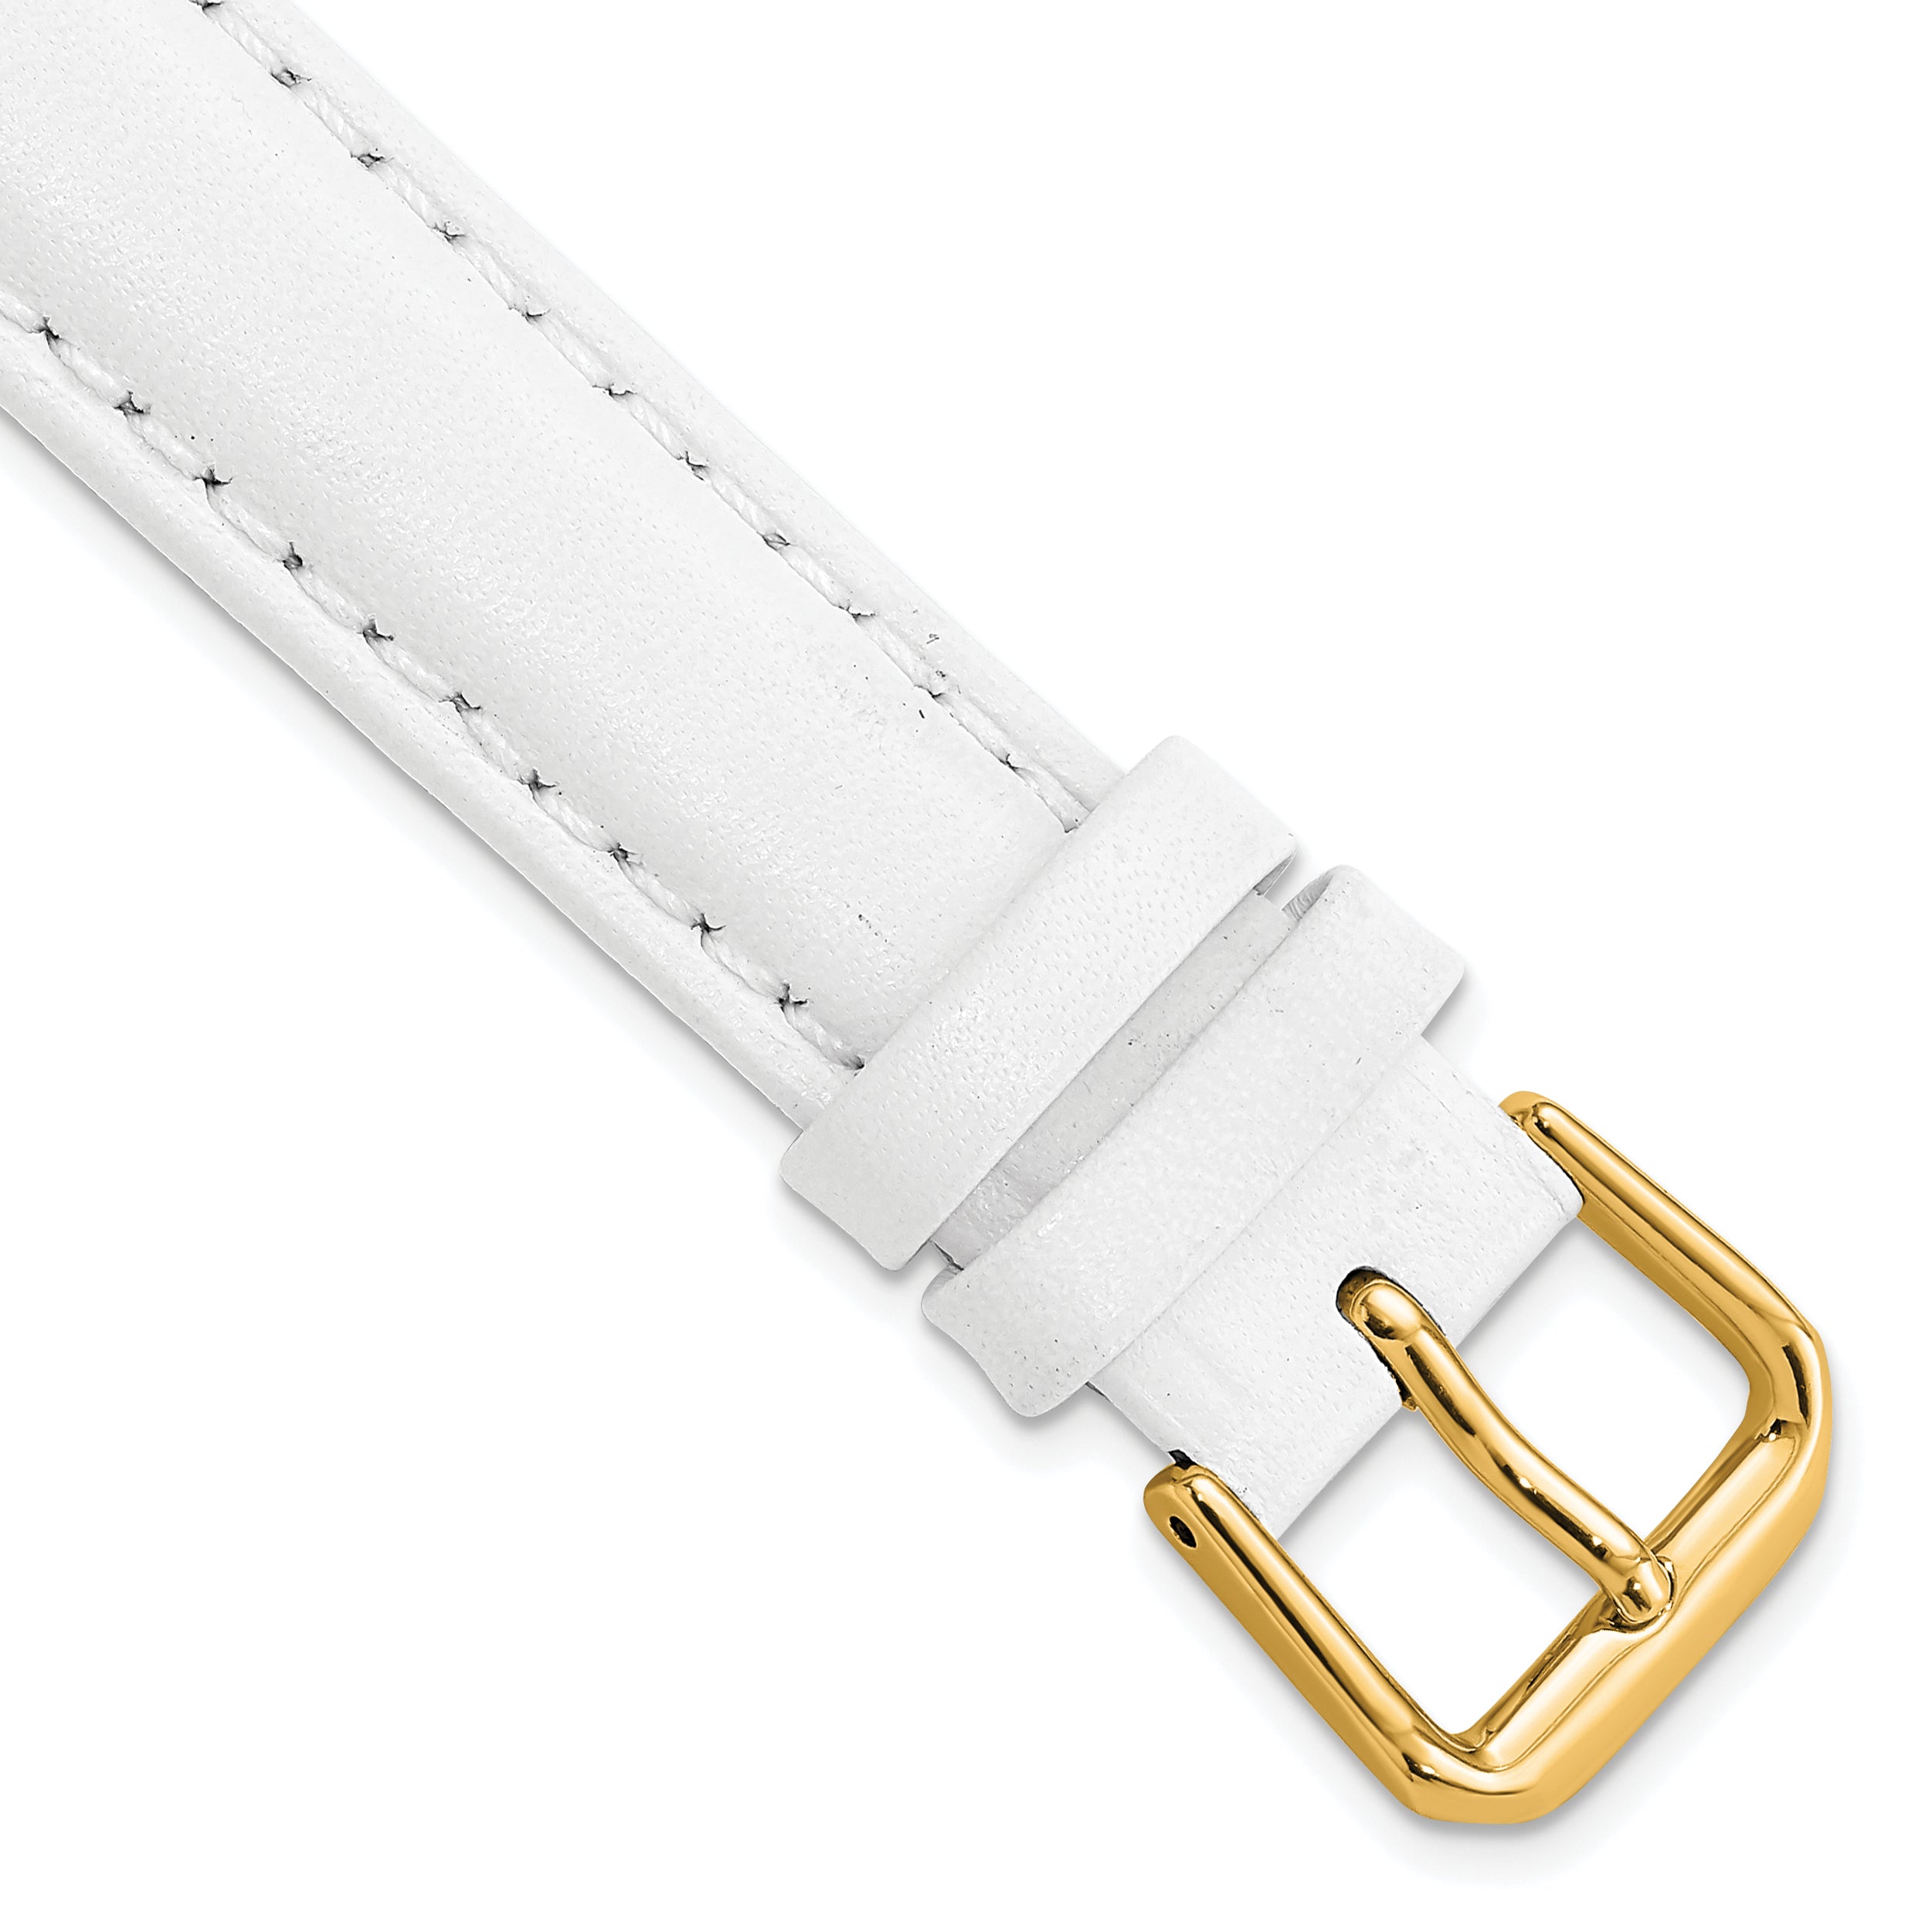 DeBeer 15mm White Smooth Leather with Gold-tone Buckle 7.5 inch Watch Band